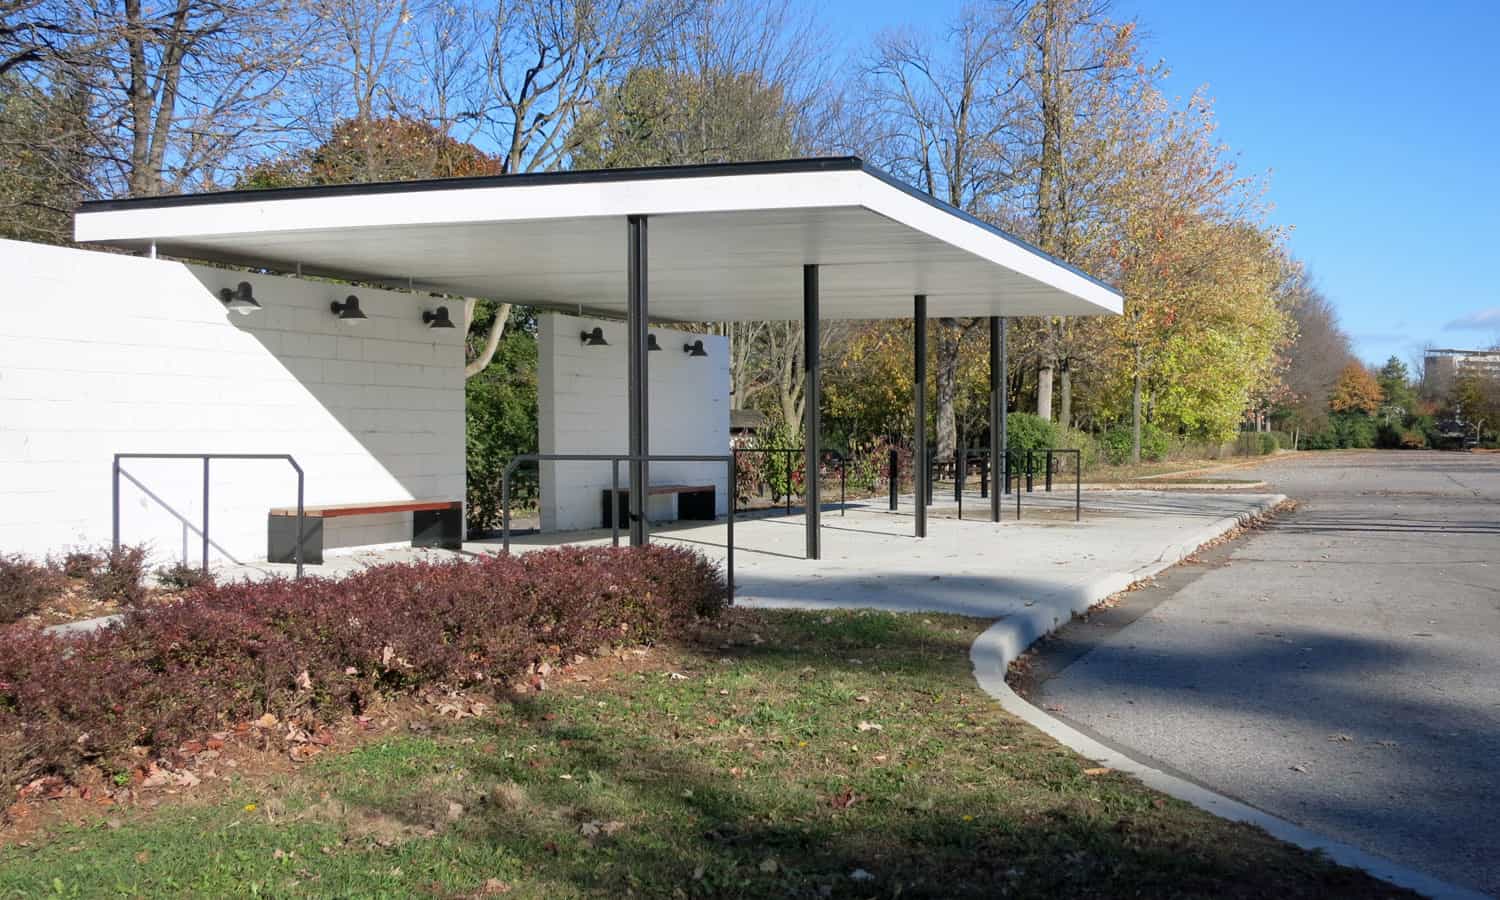 Looking east across the bus stop pavilion